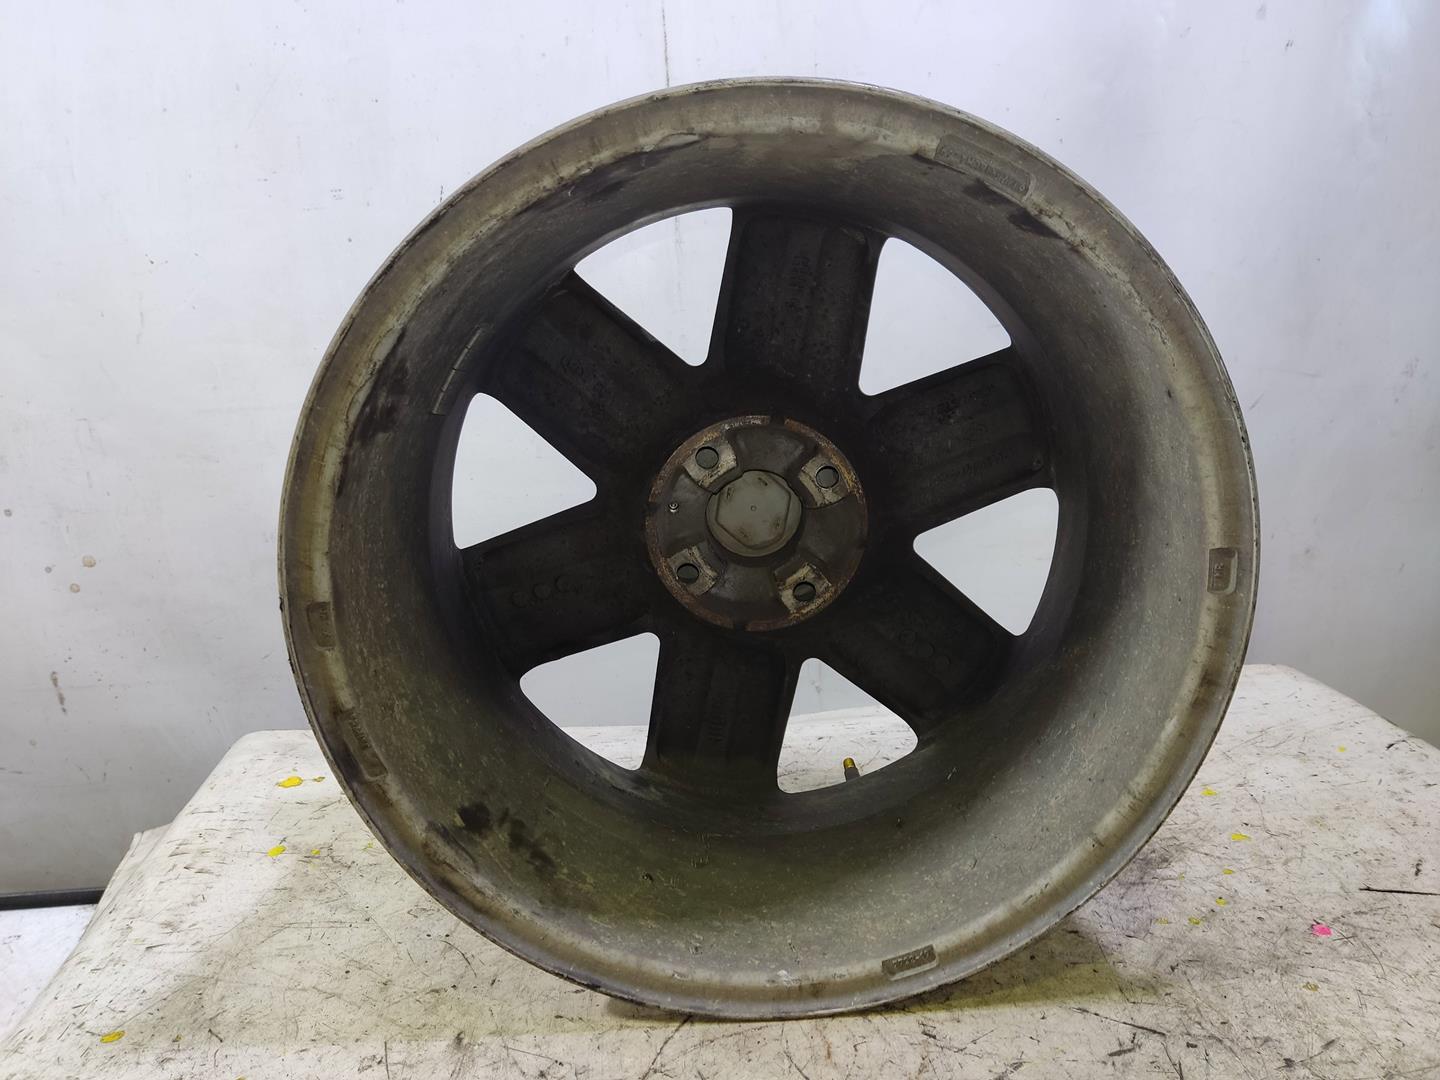 RENAULT Scenic 2 generation (2003-2010) Tire 8200310797, 61/2JX16CH4-49 19168364